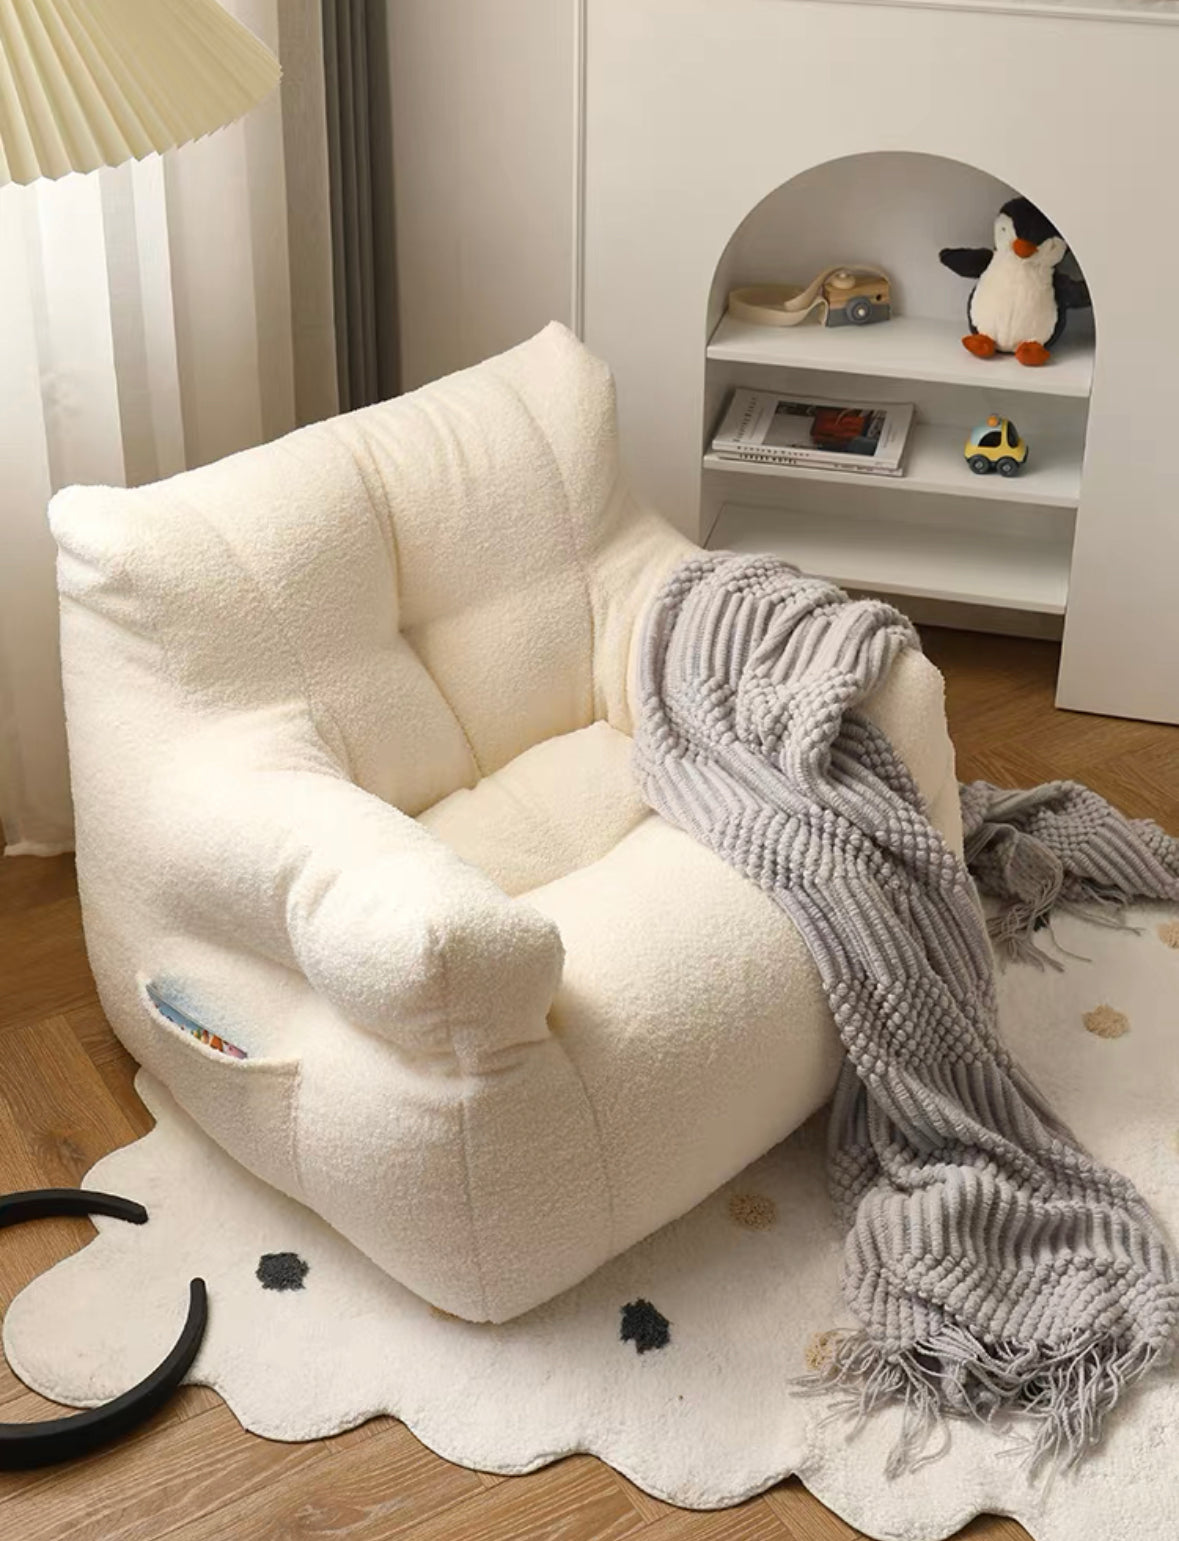 Baby/Toddler Couch - Lamb Wool White